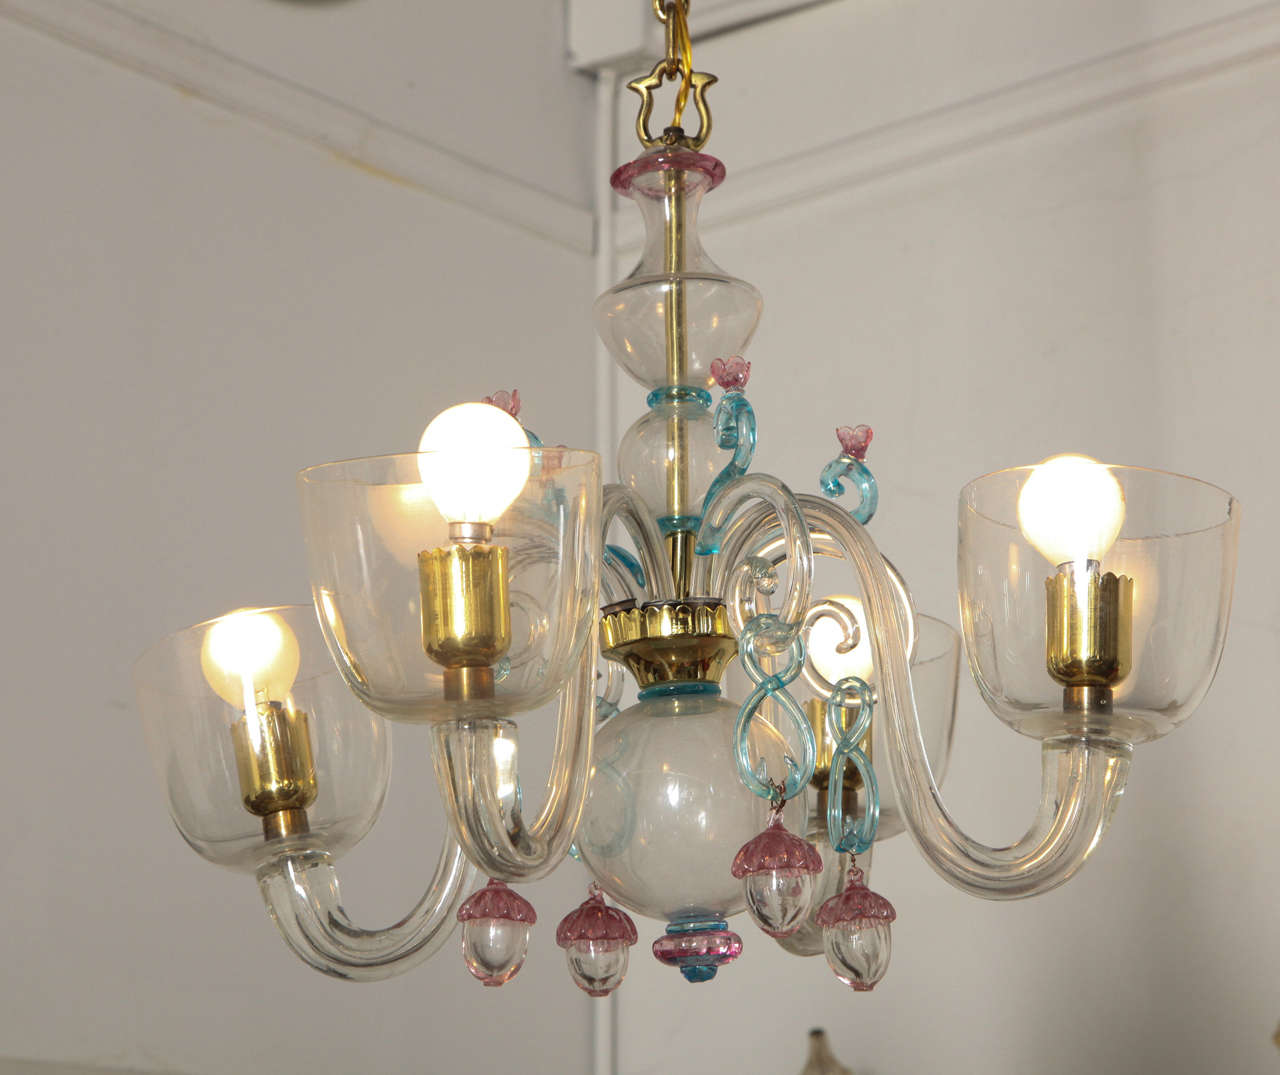 STYLISH SMALL 4 ARM CHANDELIER MADE IN VENICE 1950 By SEGUSO, DESIGNED BY FLAVIO POLI. BLUE AND ROSE APPLIED TRIM IN THE FORM OF SMALL EGG CORNS WITH HAND MADE BRASS CHAIN, BEAUTIFUL QUALITY.